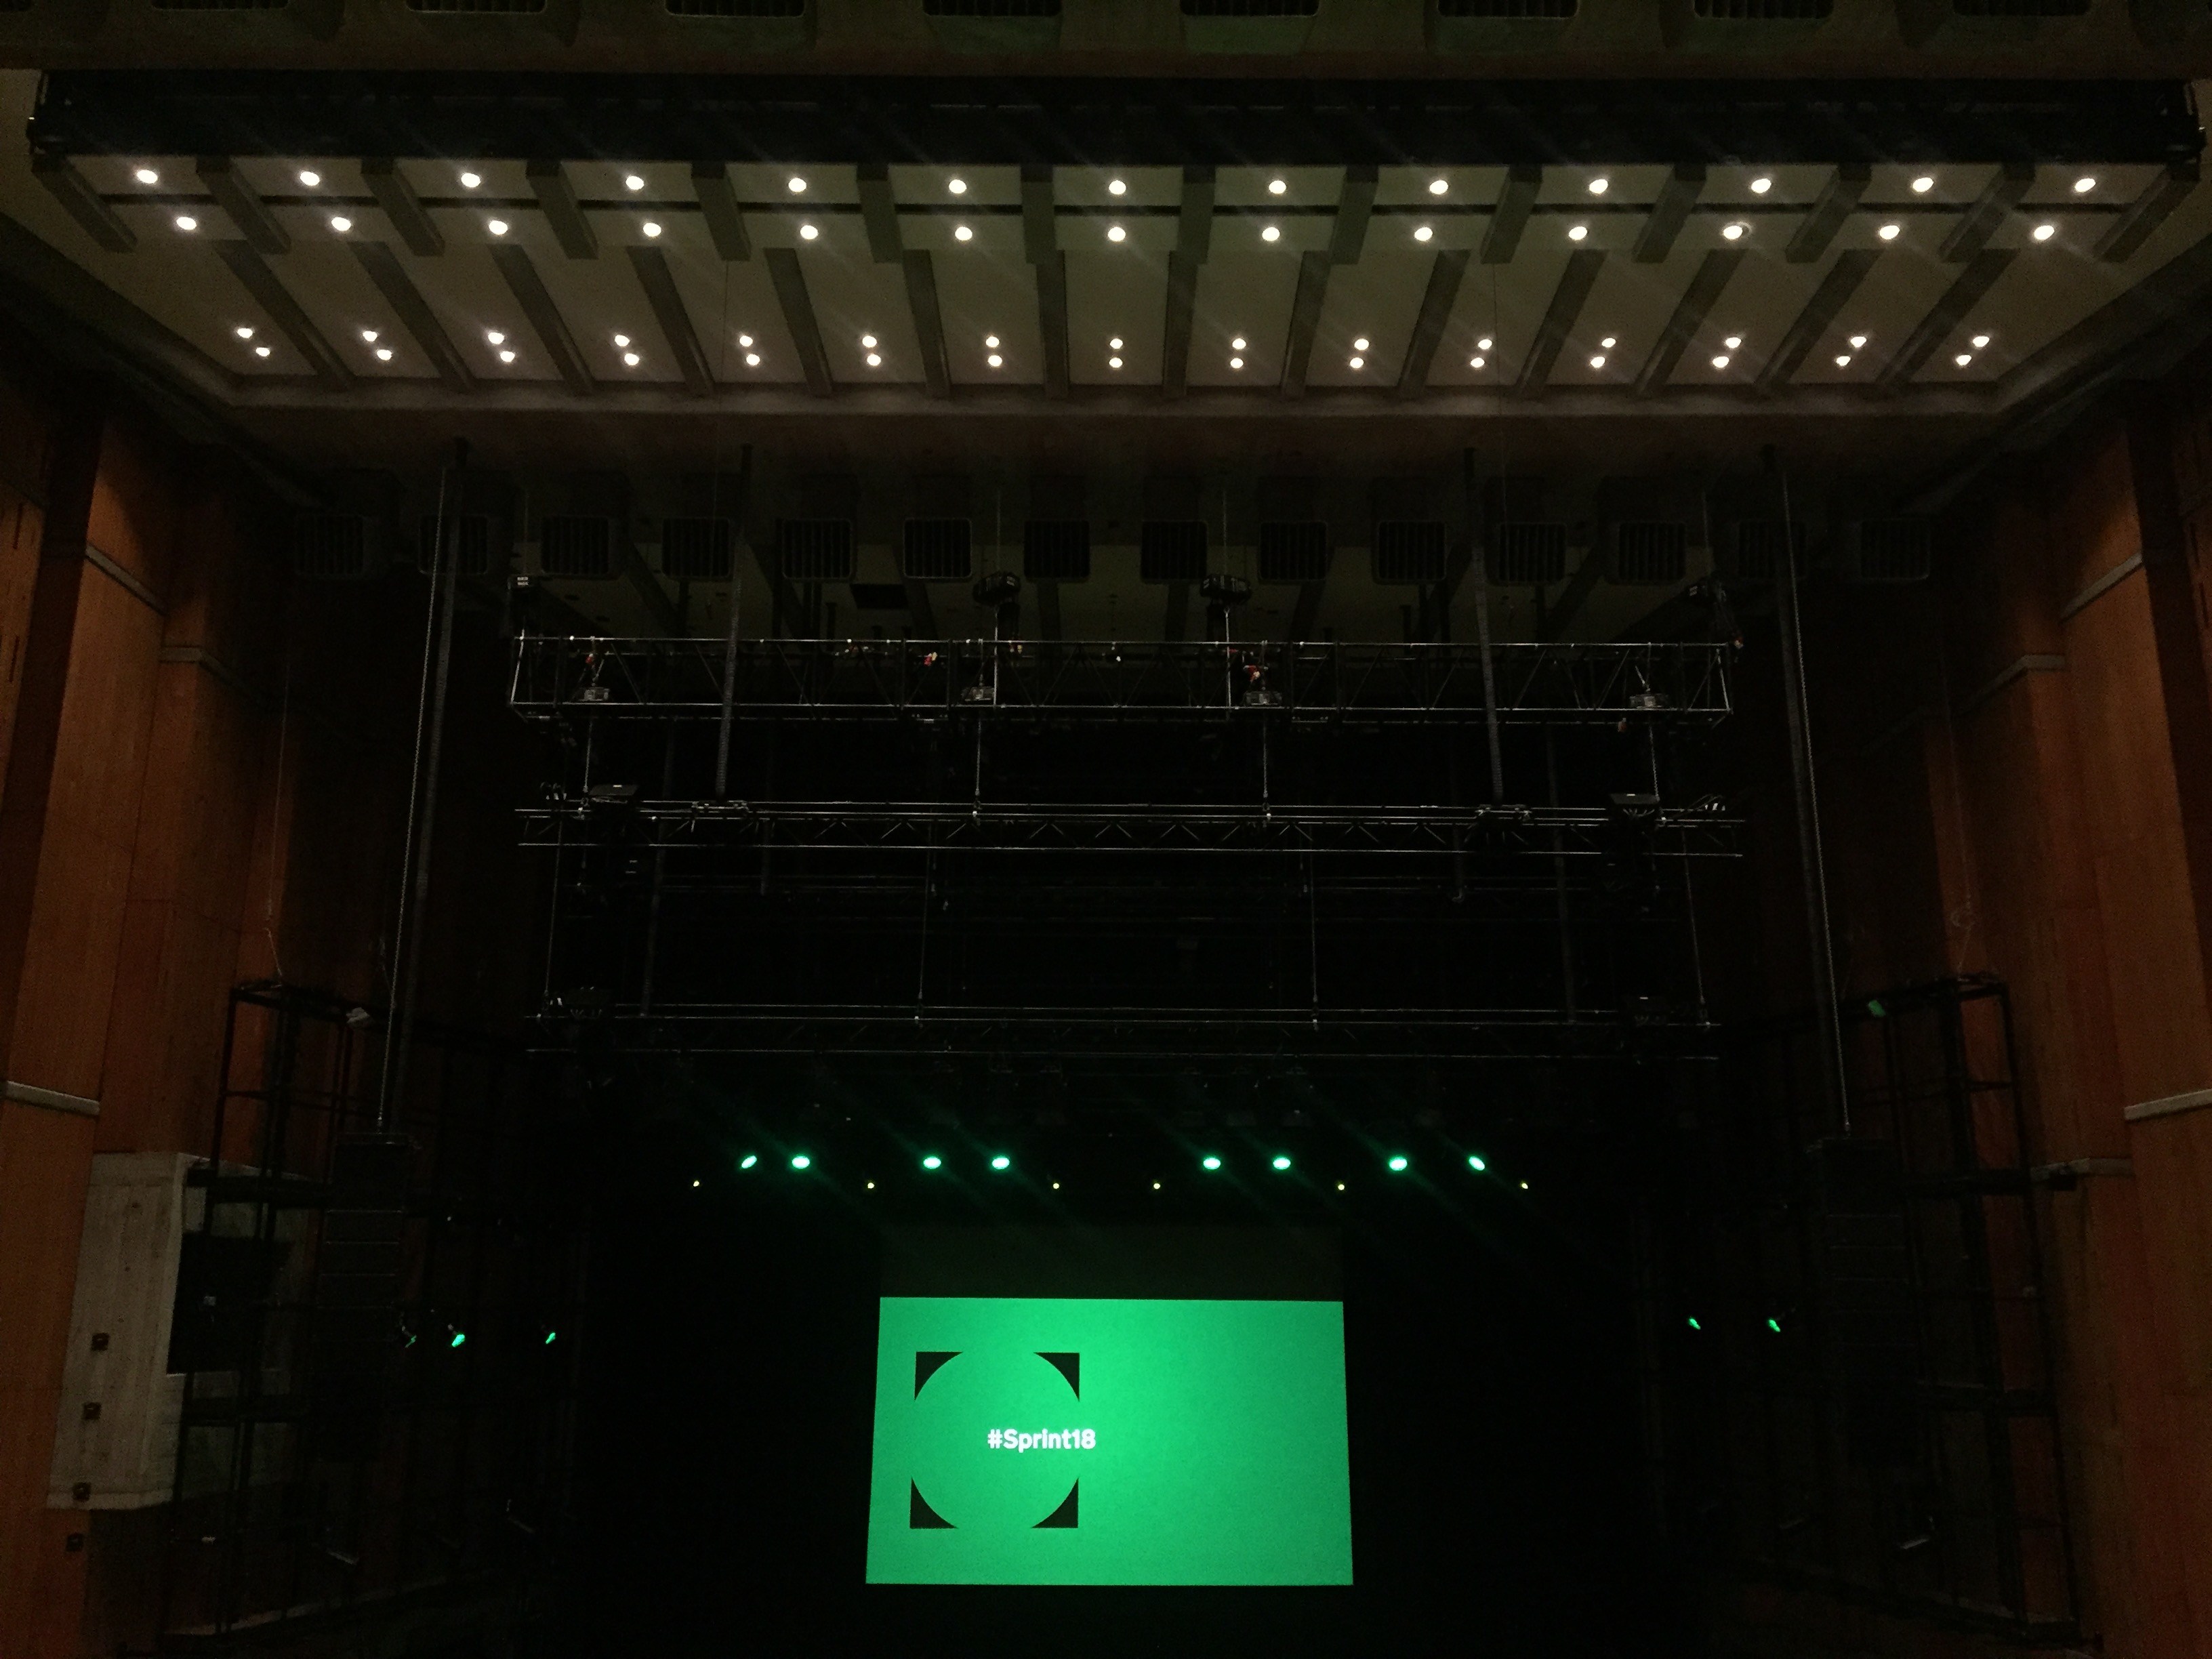 #Sprint18 logo projected onto the screen in the auditorium